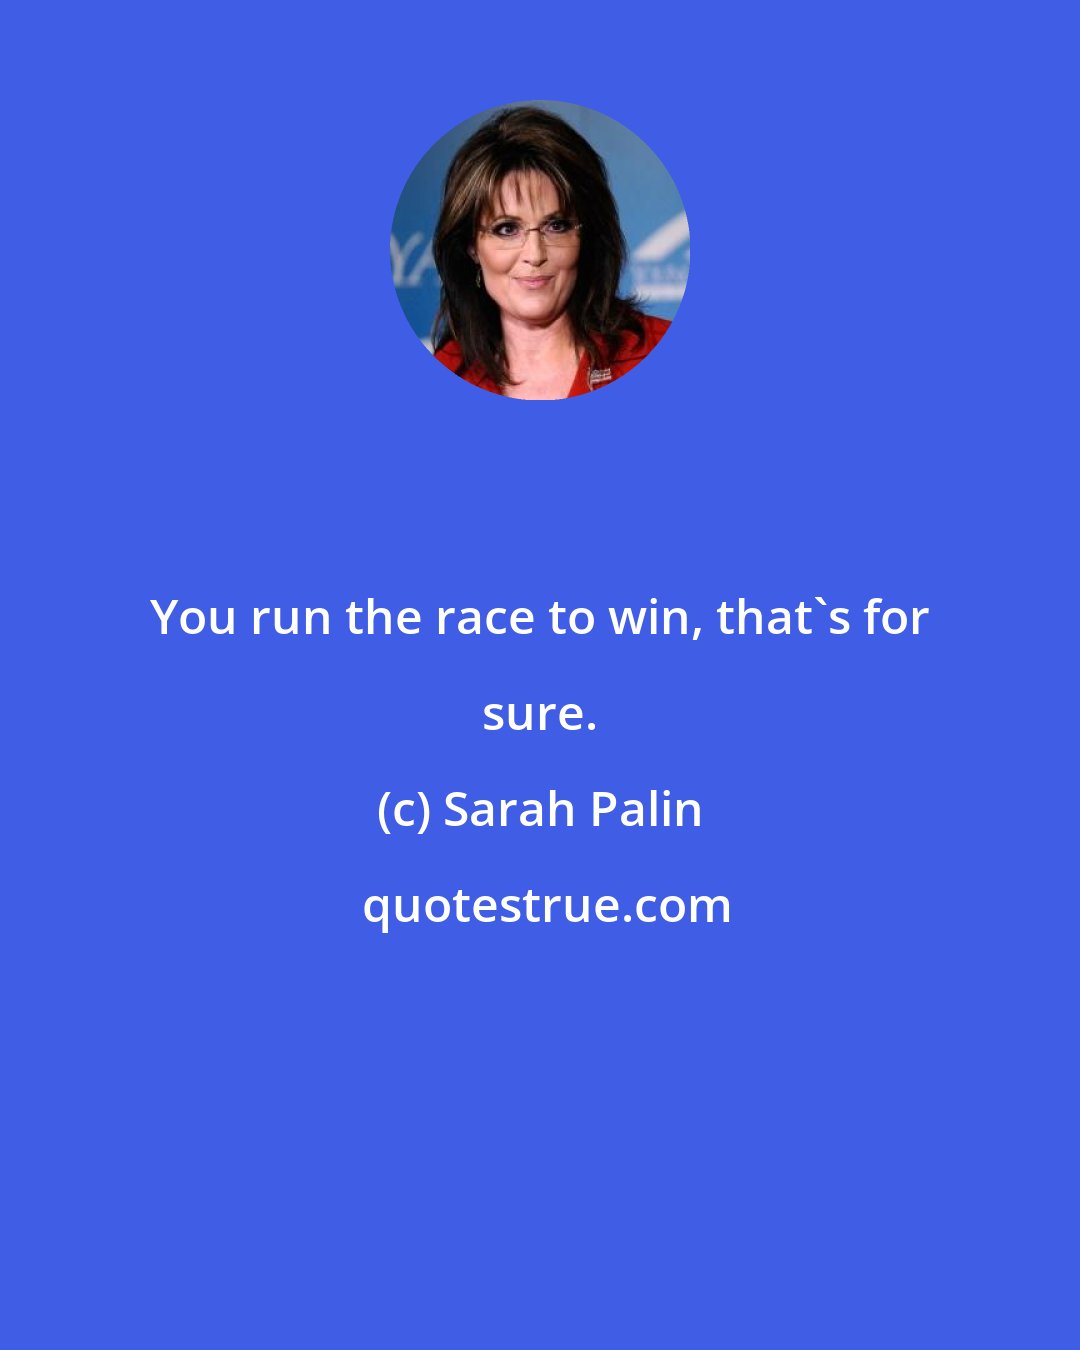 Sarah Palin: You run the race to win, that's for sure.